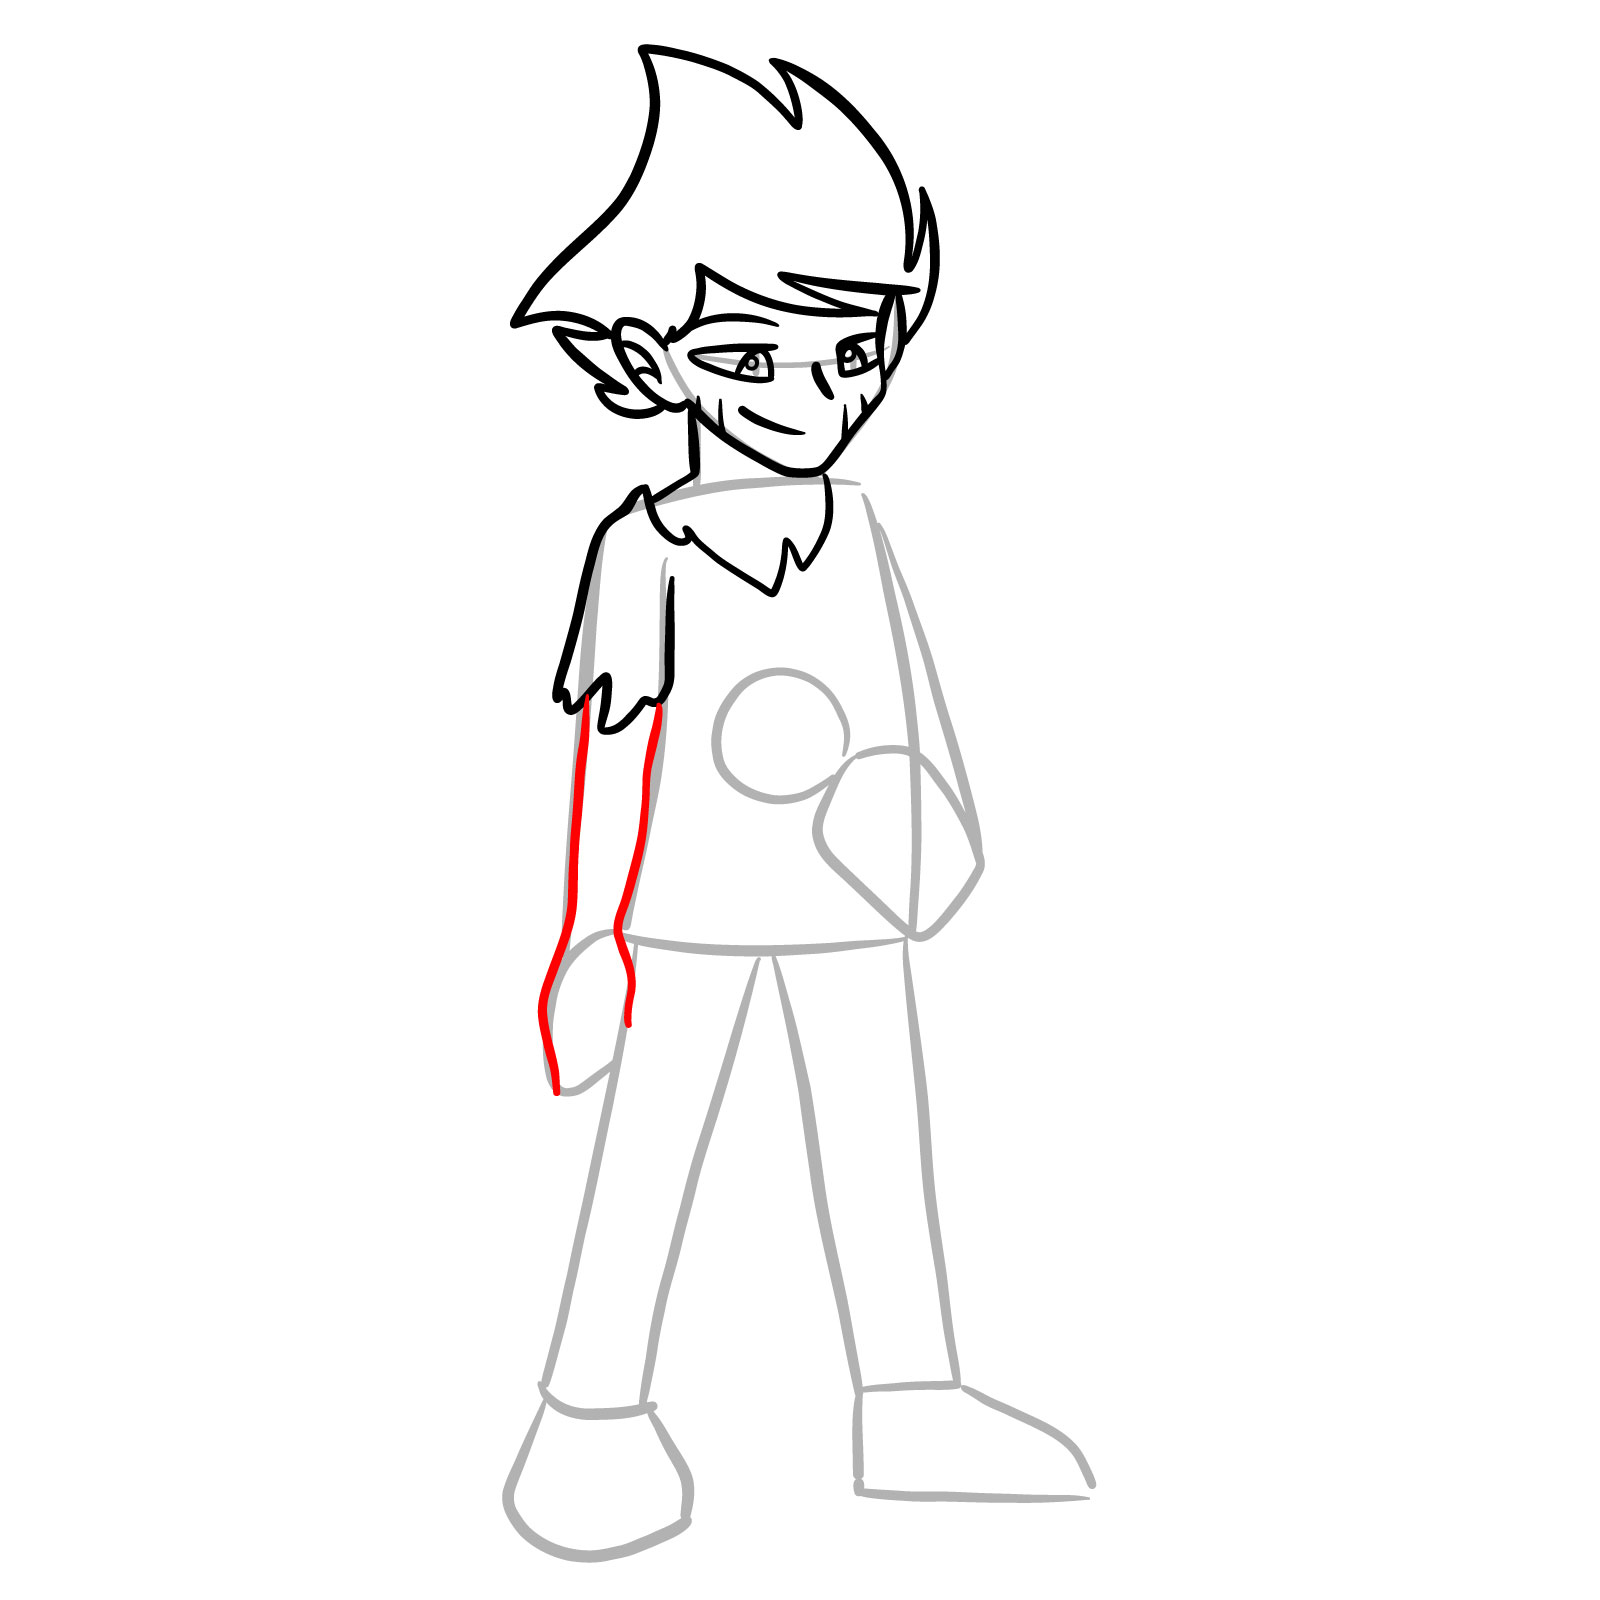 How to draw Bosip from FNF - step 14